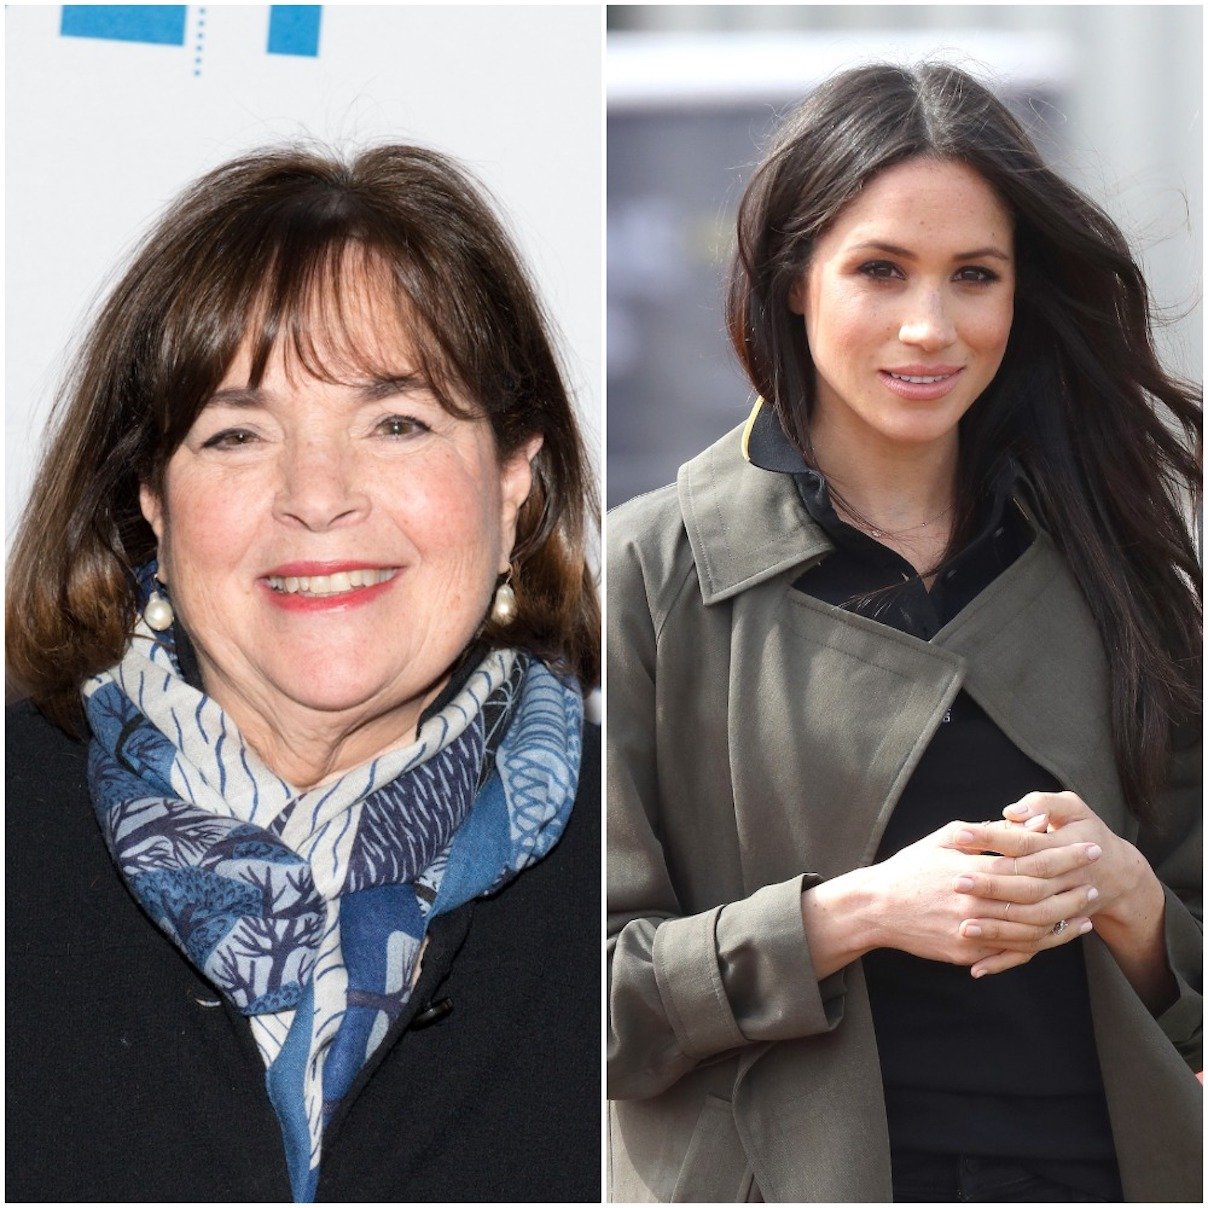 (L-R) Ina Garten in 2017 and Meghan Markle in 2018